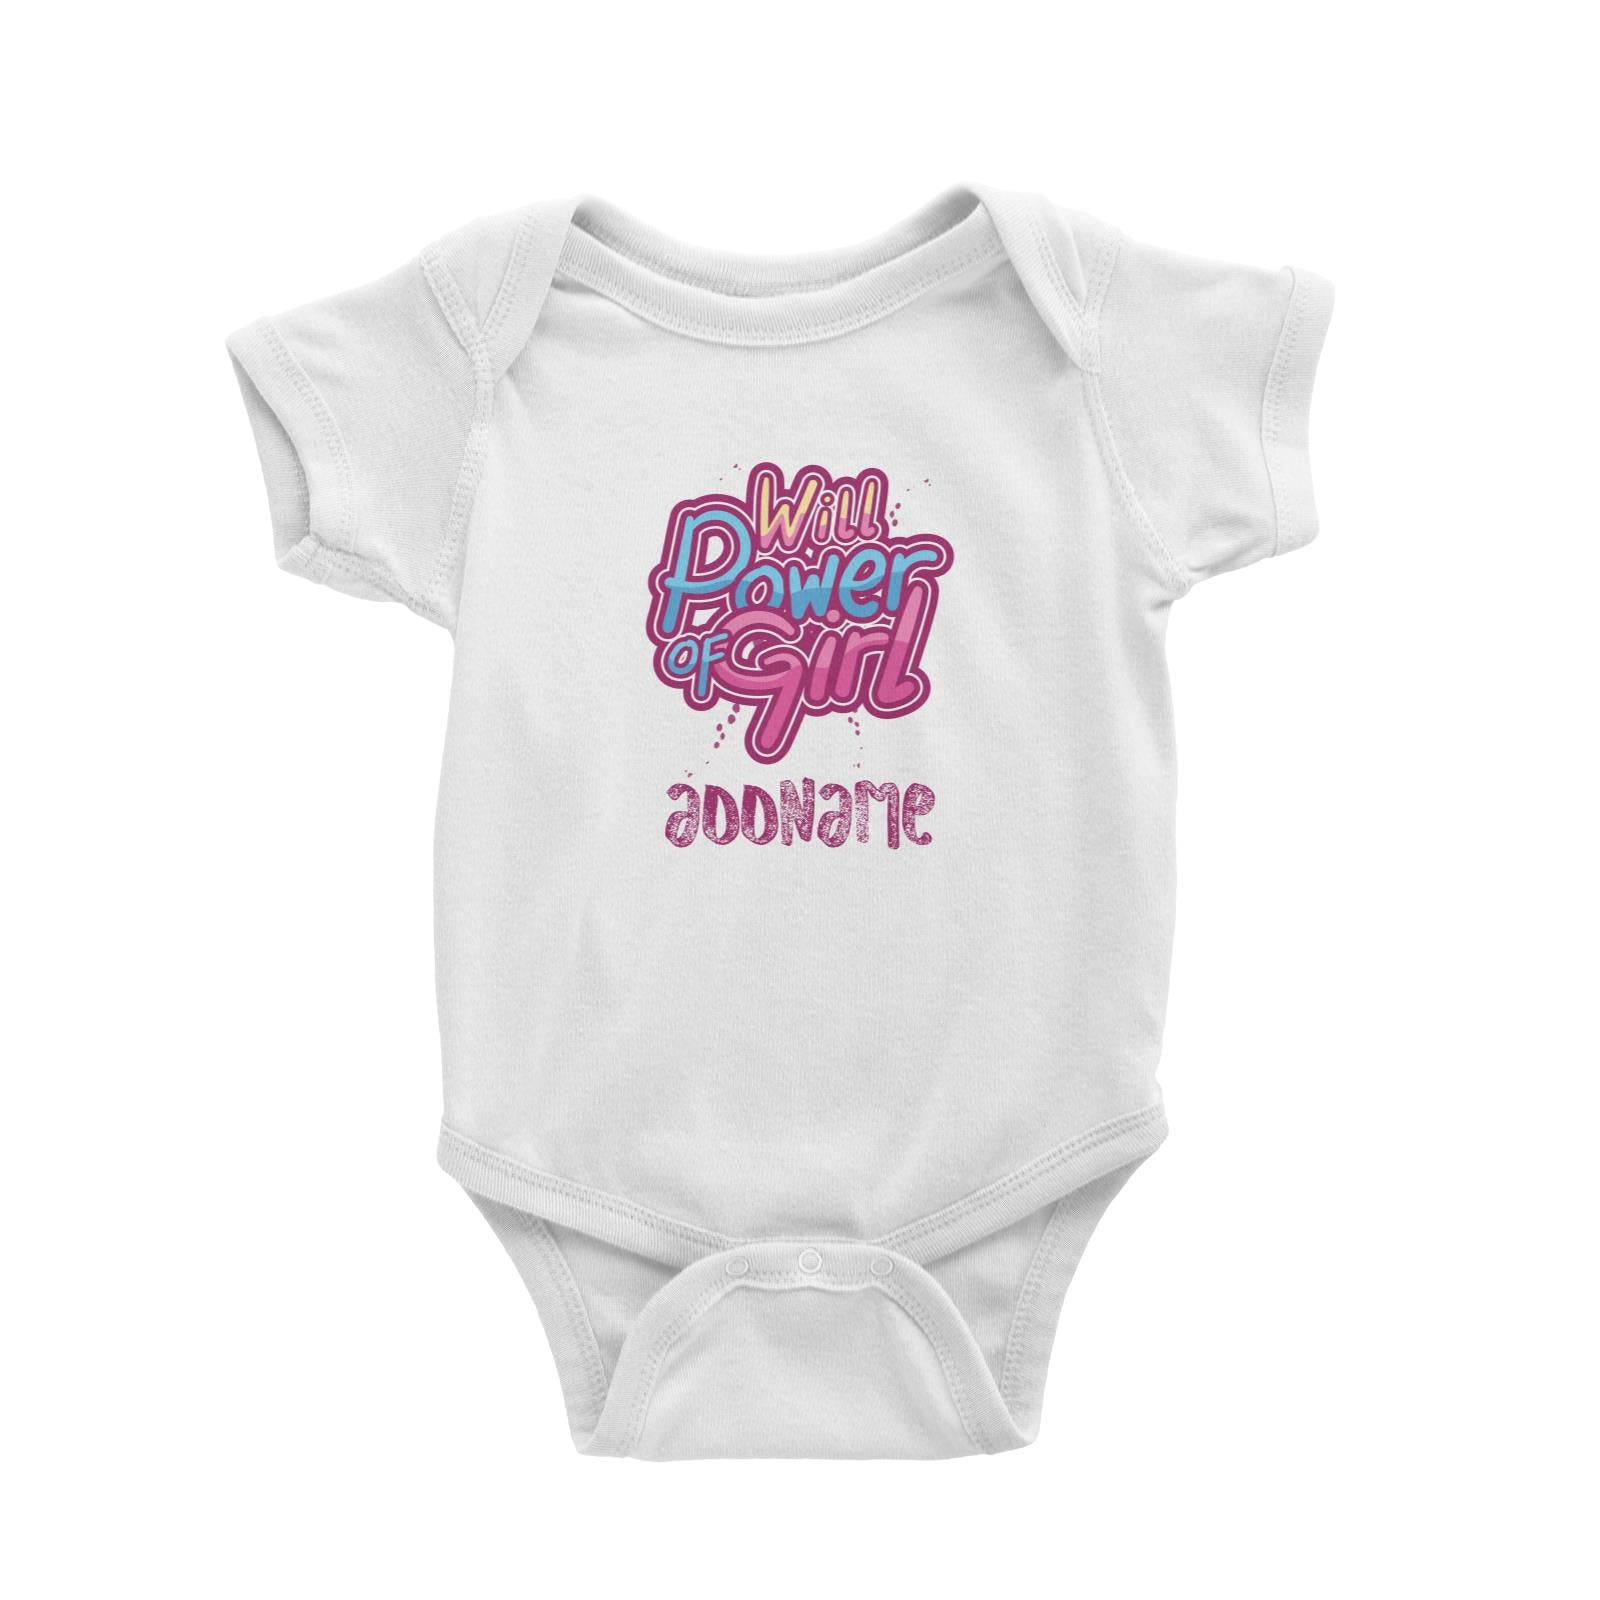 Cool Cute Words Will Power Of Girl Addname Baby Romper